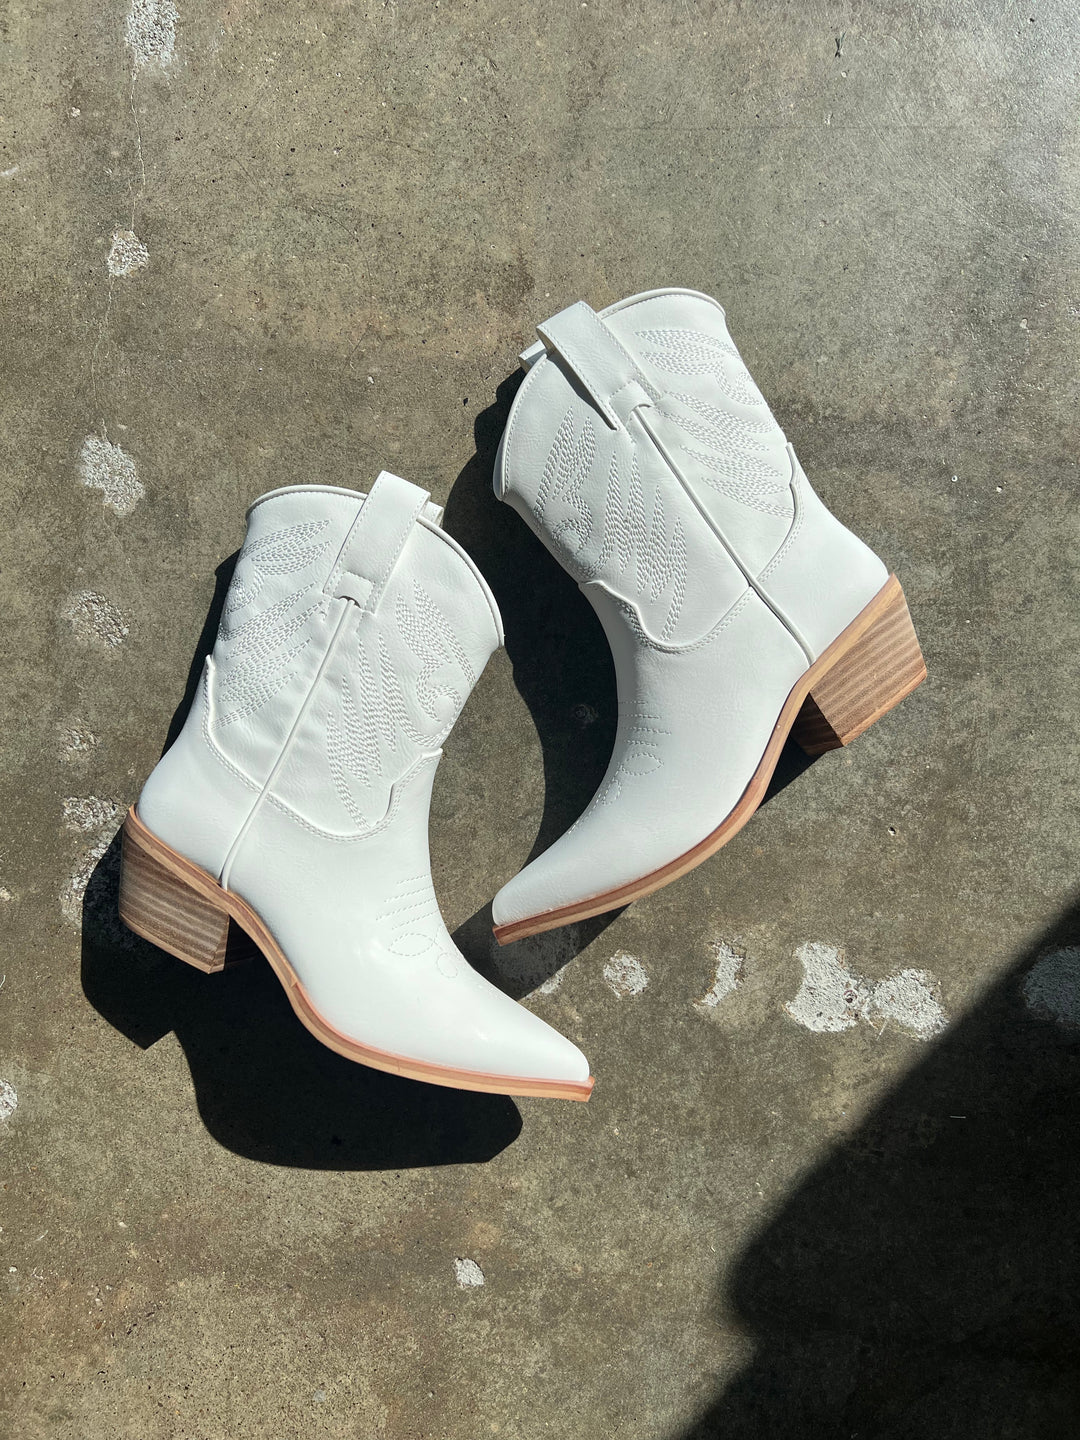 Zahara Boots, Shoes, Adeline, Adeline, dallas boutique, dallas texas, texas boutique, women's boutique dallas, adeline boutique, dallas boutique, trendy boutique, affordable boutique